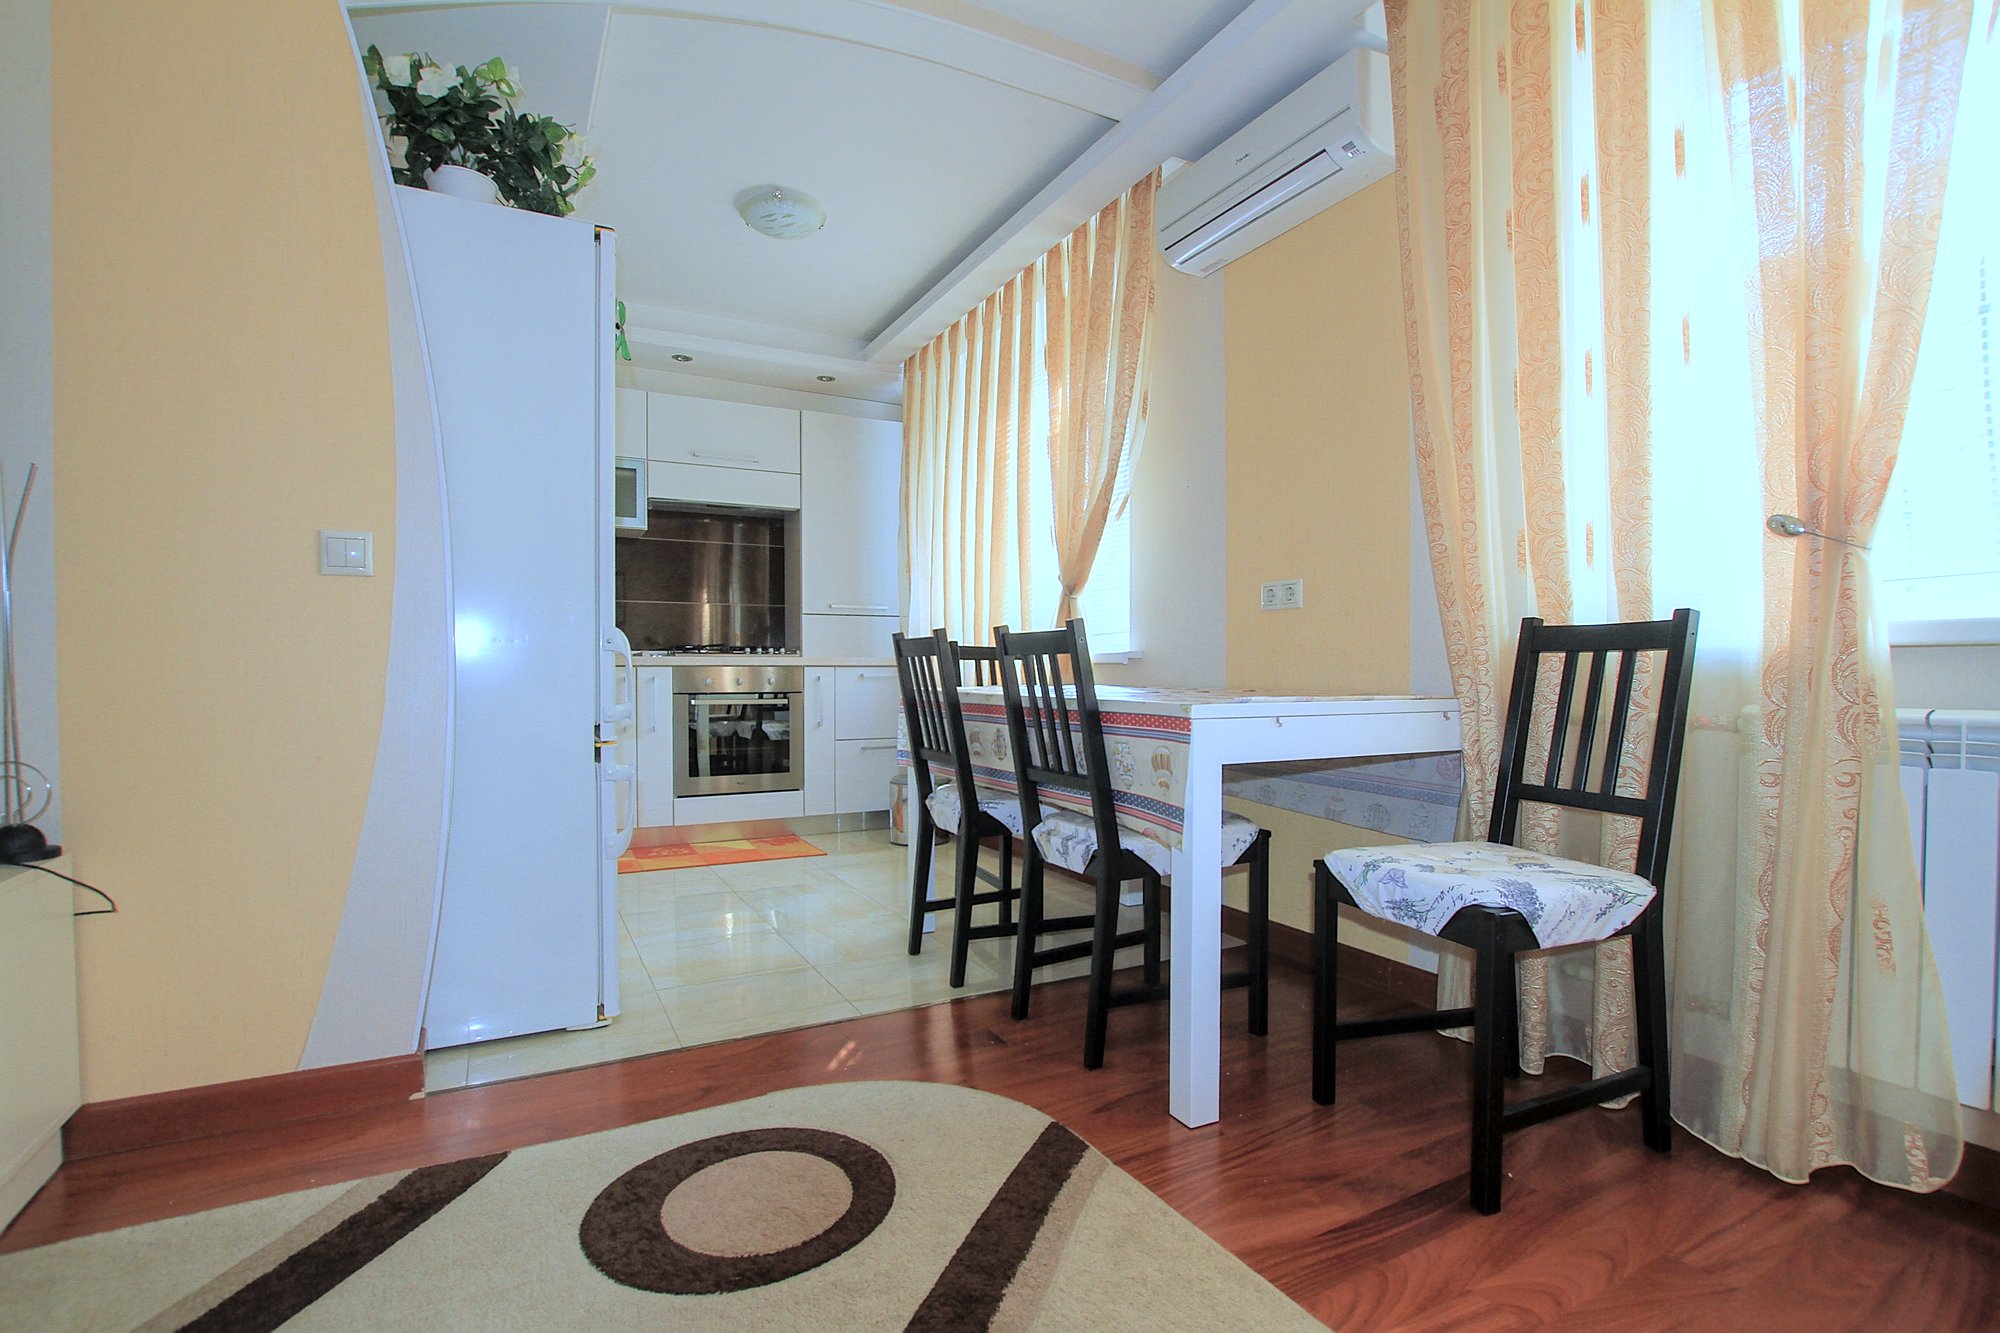 Botanica Family Apartment is a 3 rooms apartment for rent in Chisinau, Moldova